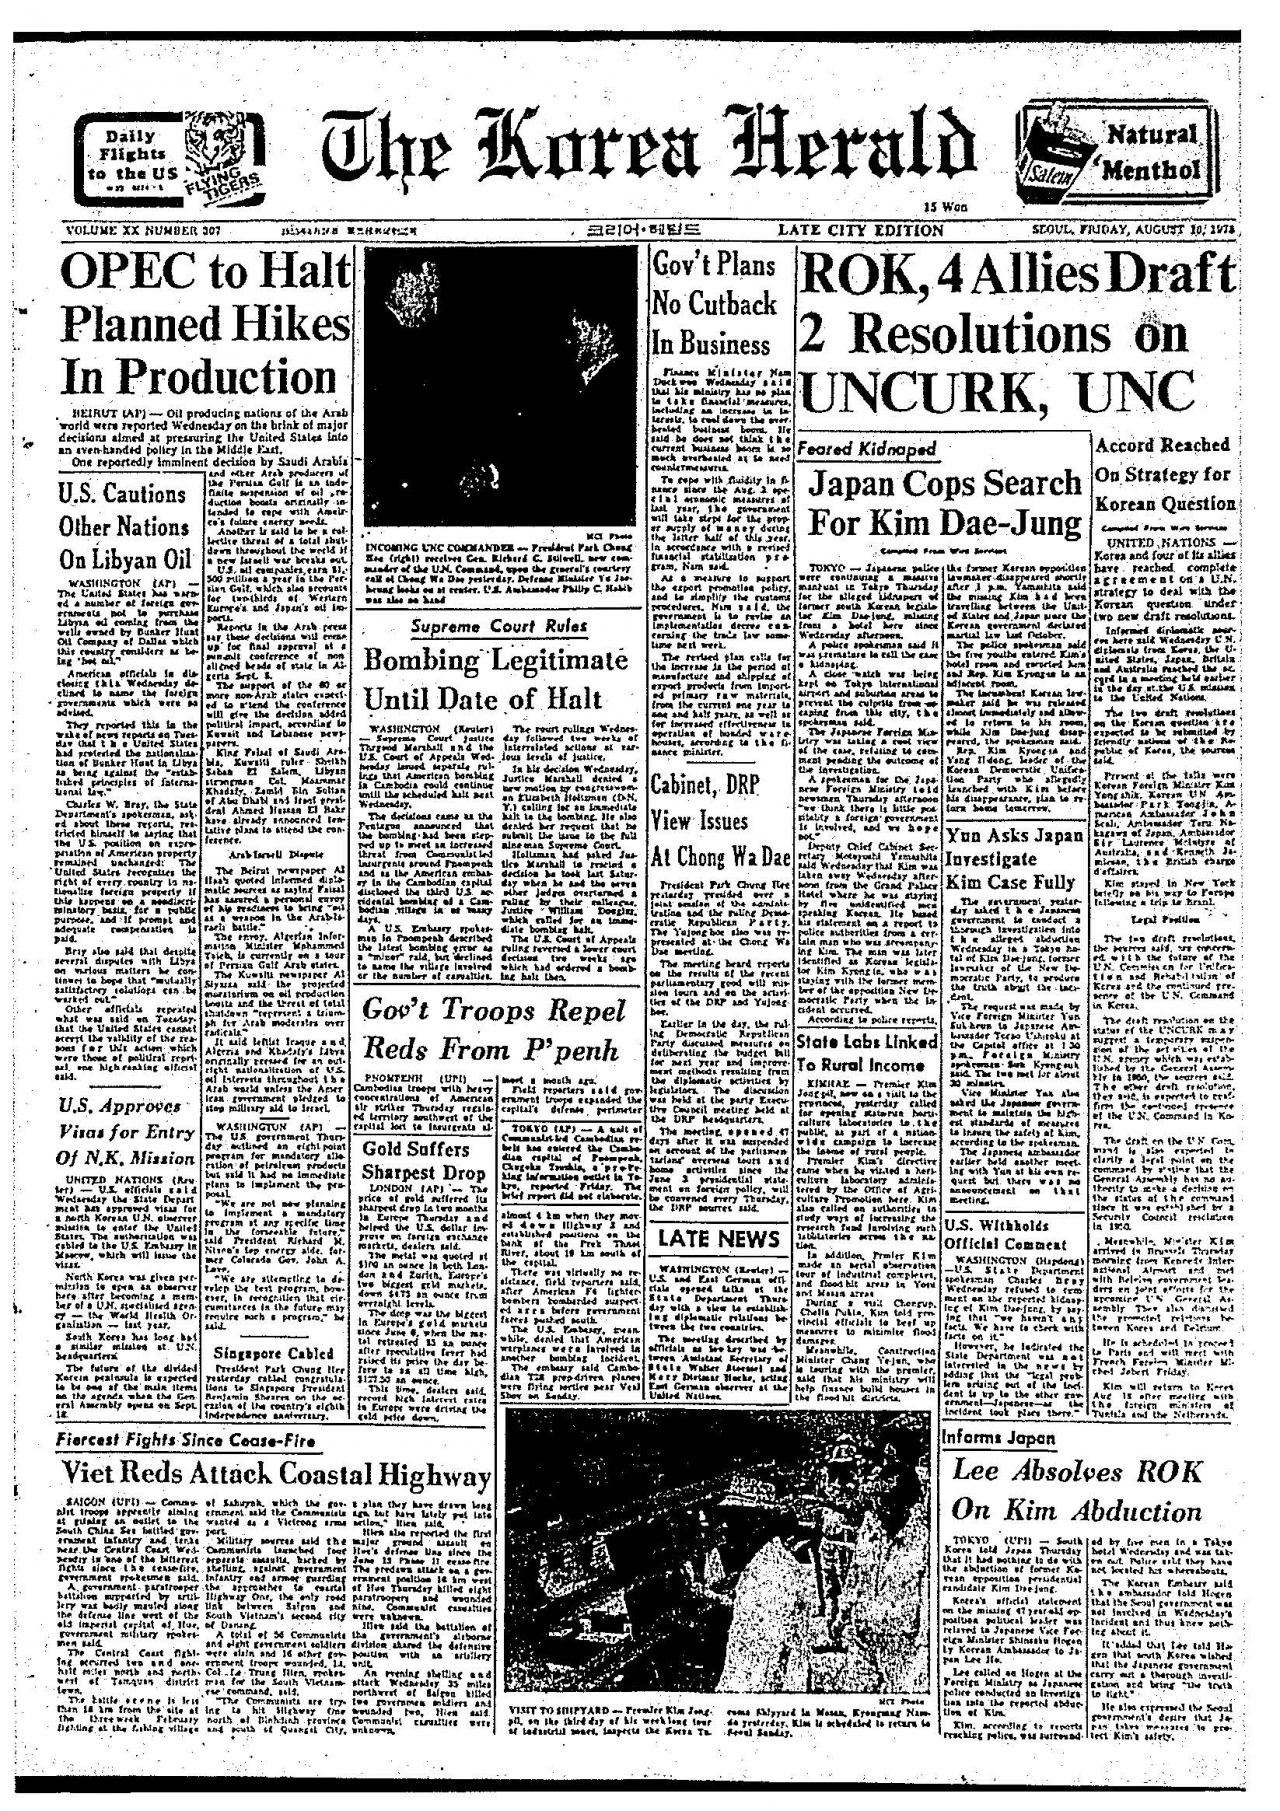 The Aug. 10, 1973 edition of The Korea Herald